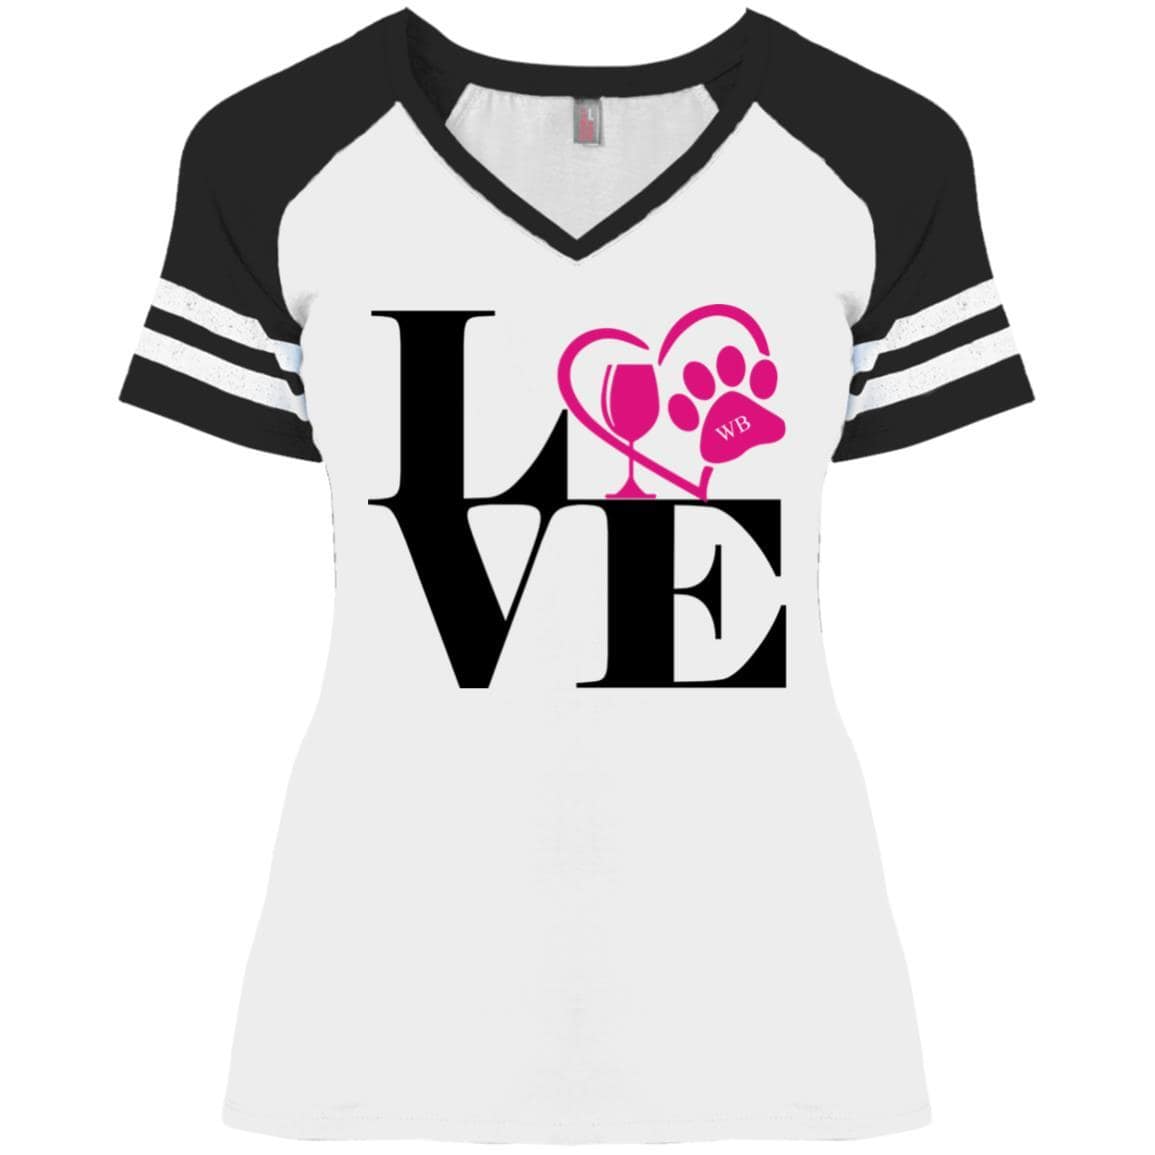 T-Shirts White/Black / X-Small WineyBitches.Co "Love Paw 2" District Ladies' Game V-Neck T-Shirt WineyBitchesCo